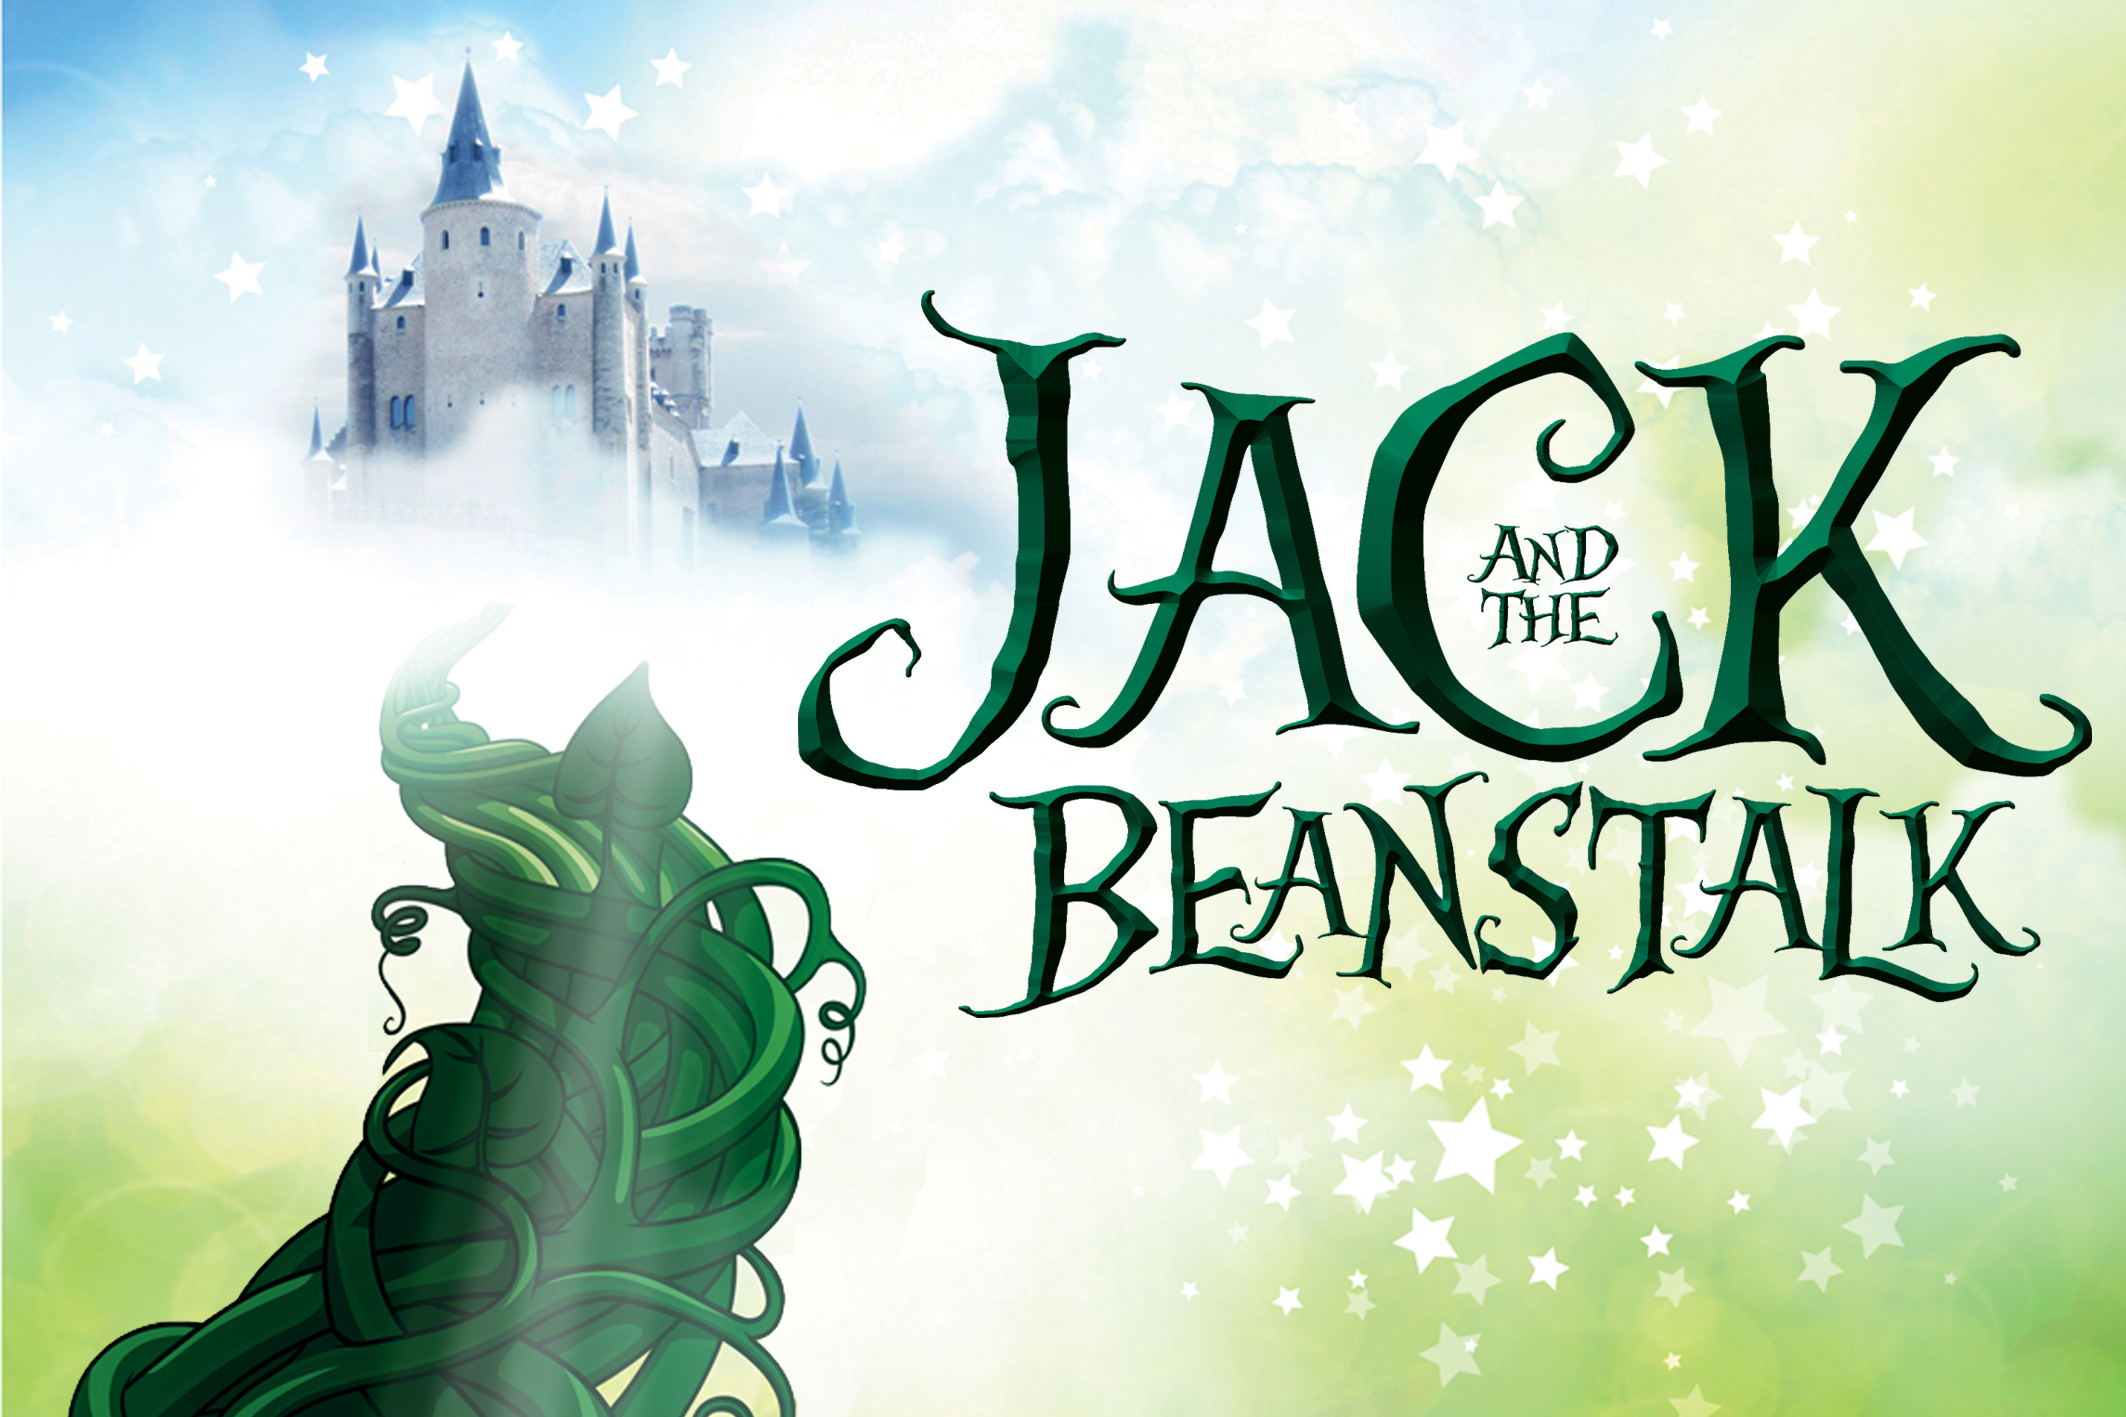 Disney: "Jack And The Beanstalk" Is Getting A Live-Action Remake